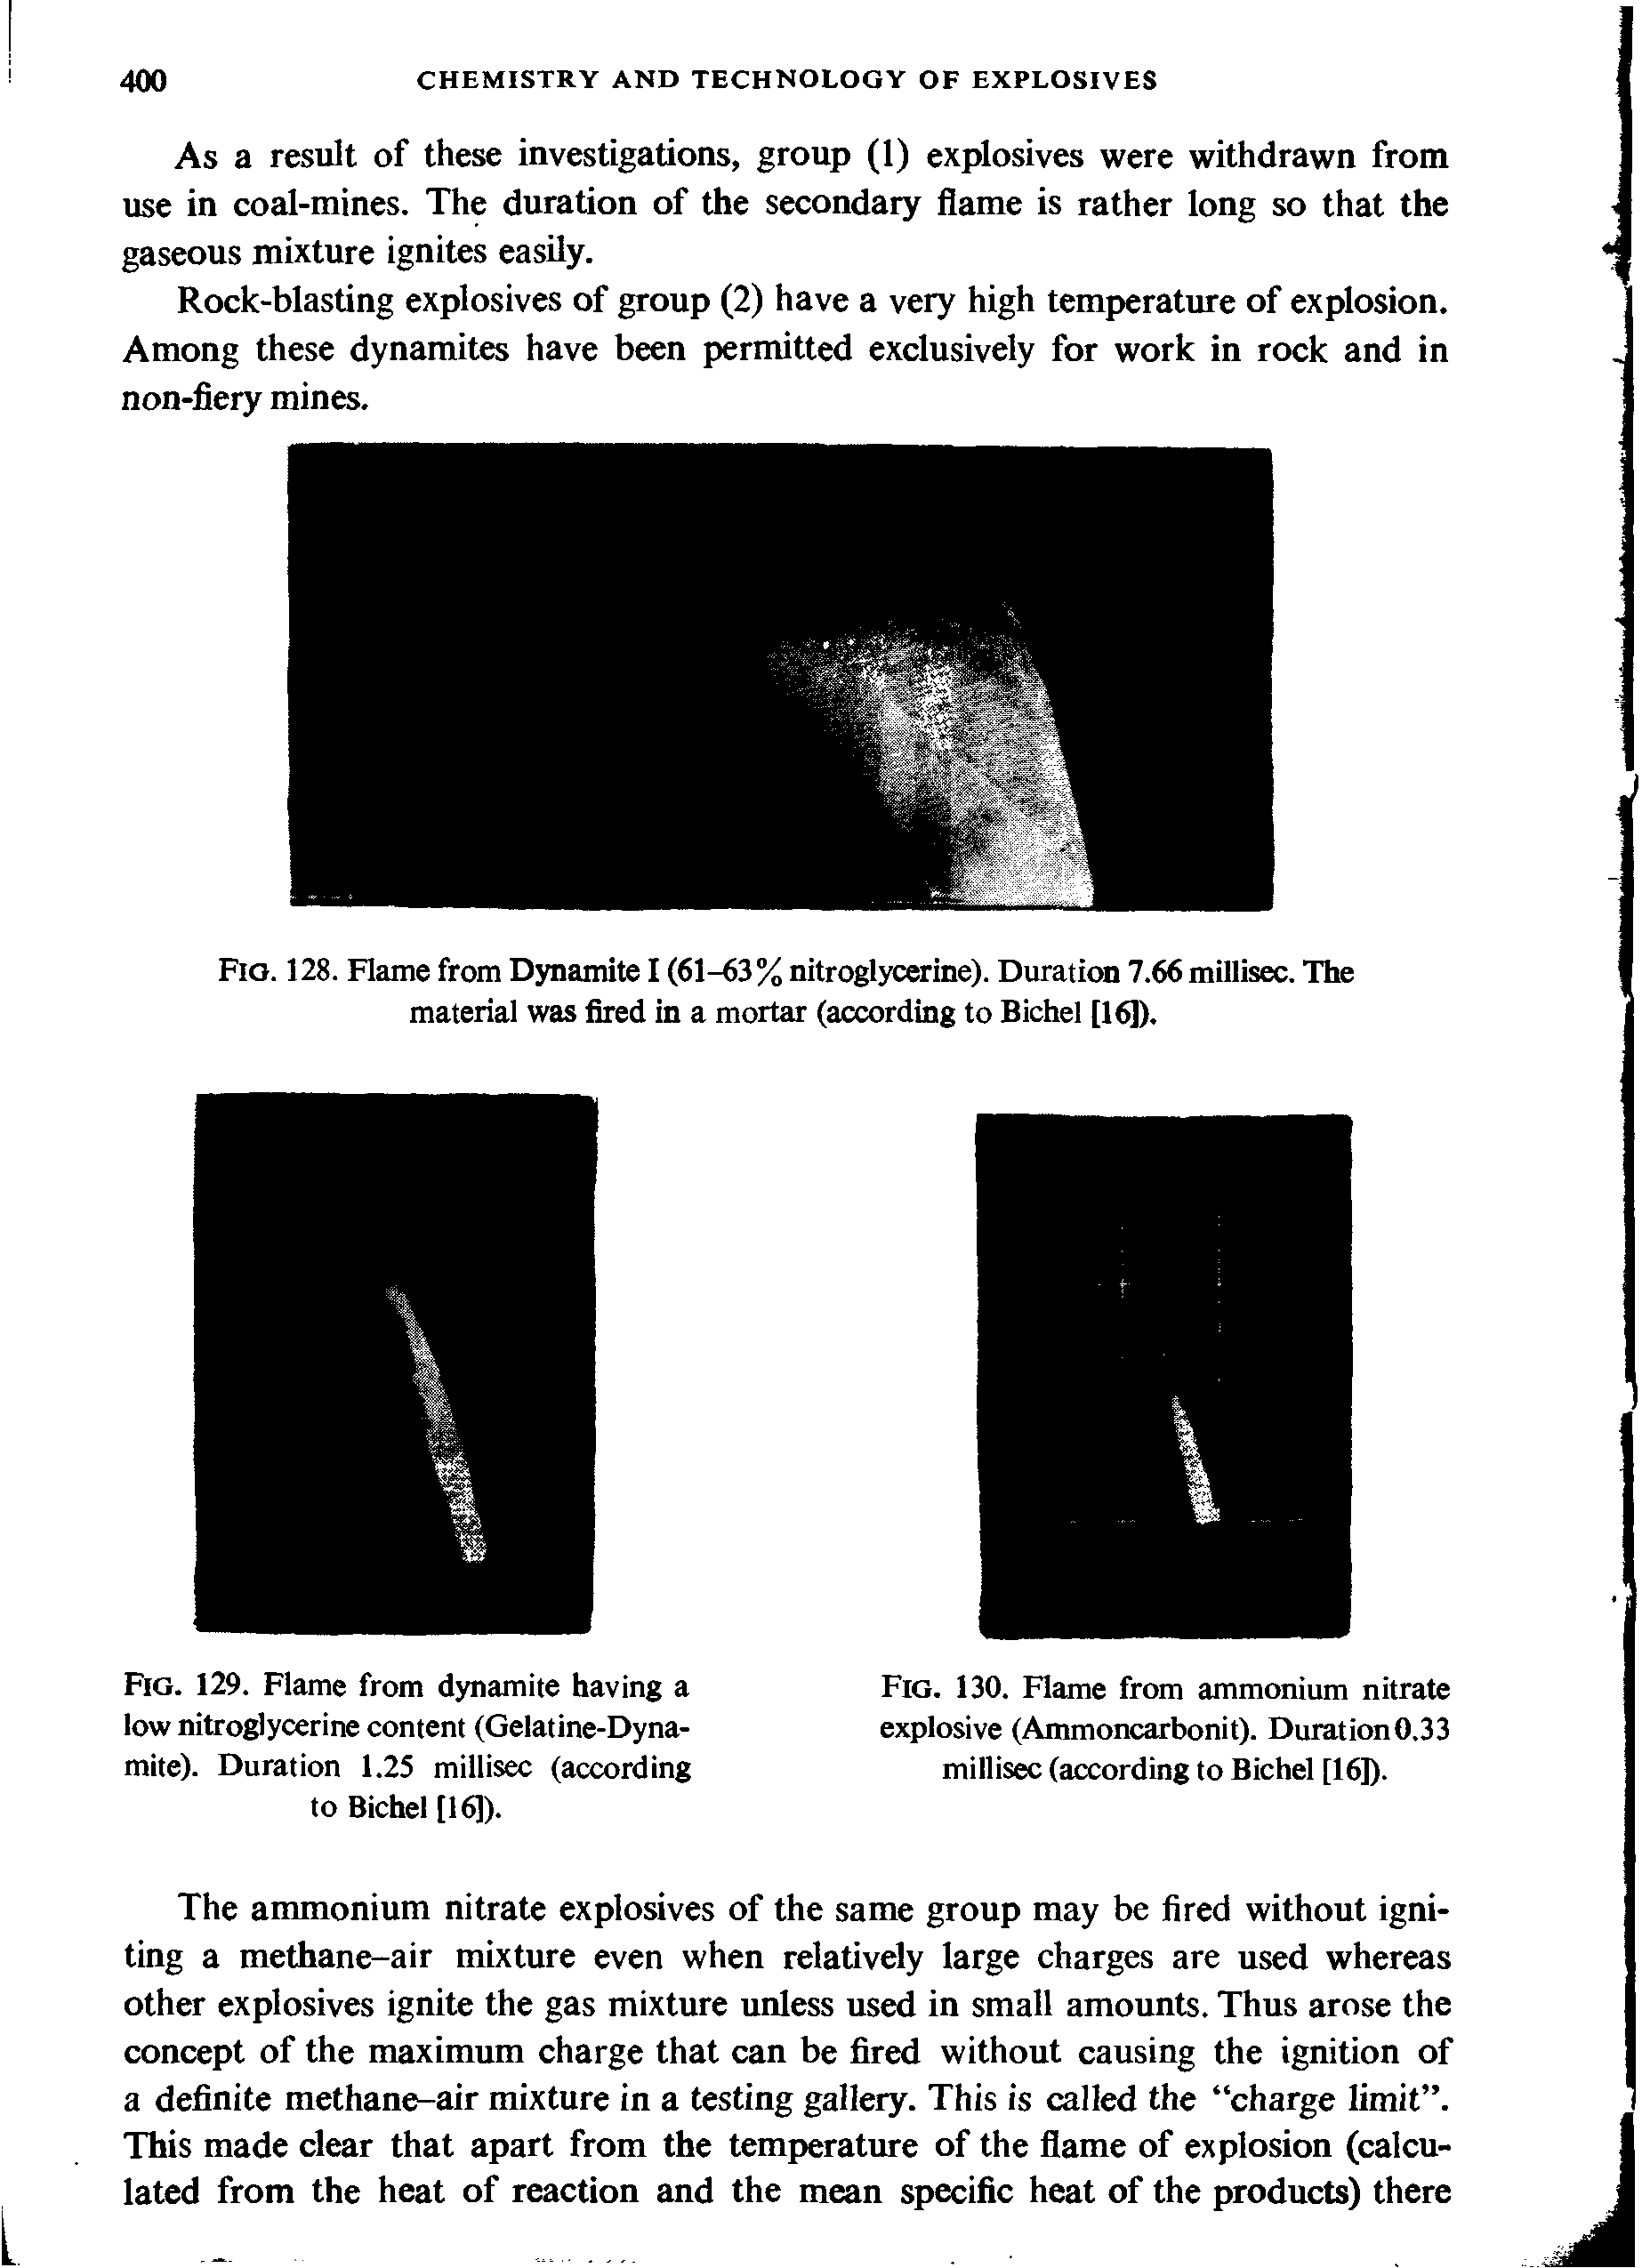 Fig. 130. Flame from ammonium nitrate explosive (Ammoncarbonit). DurationO.33 millisec (according to Bichel [16]).